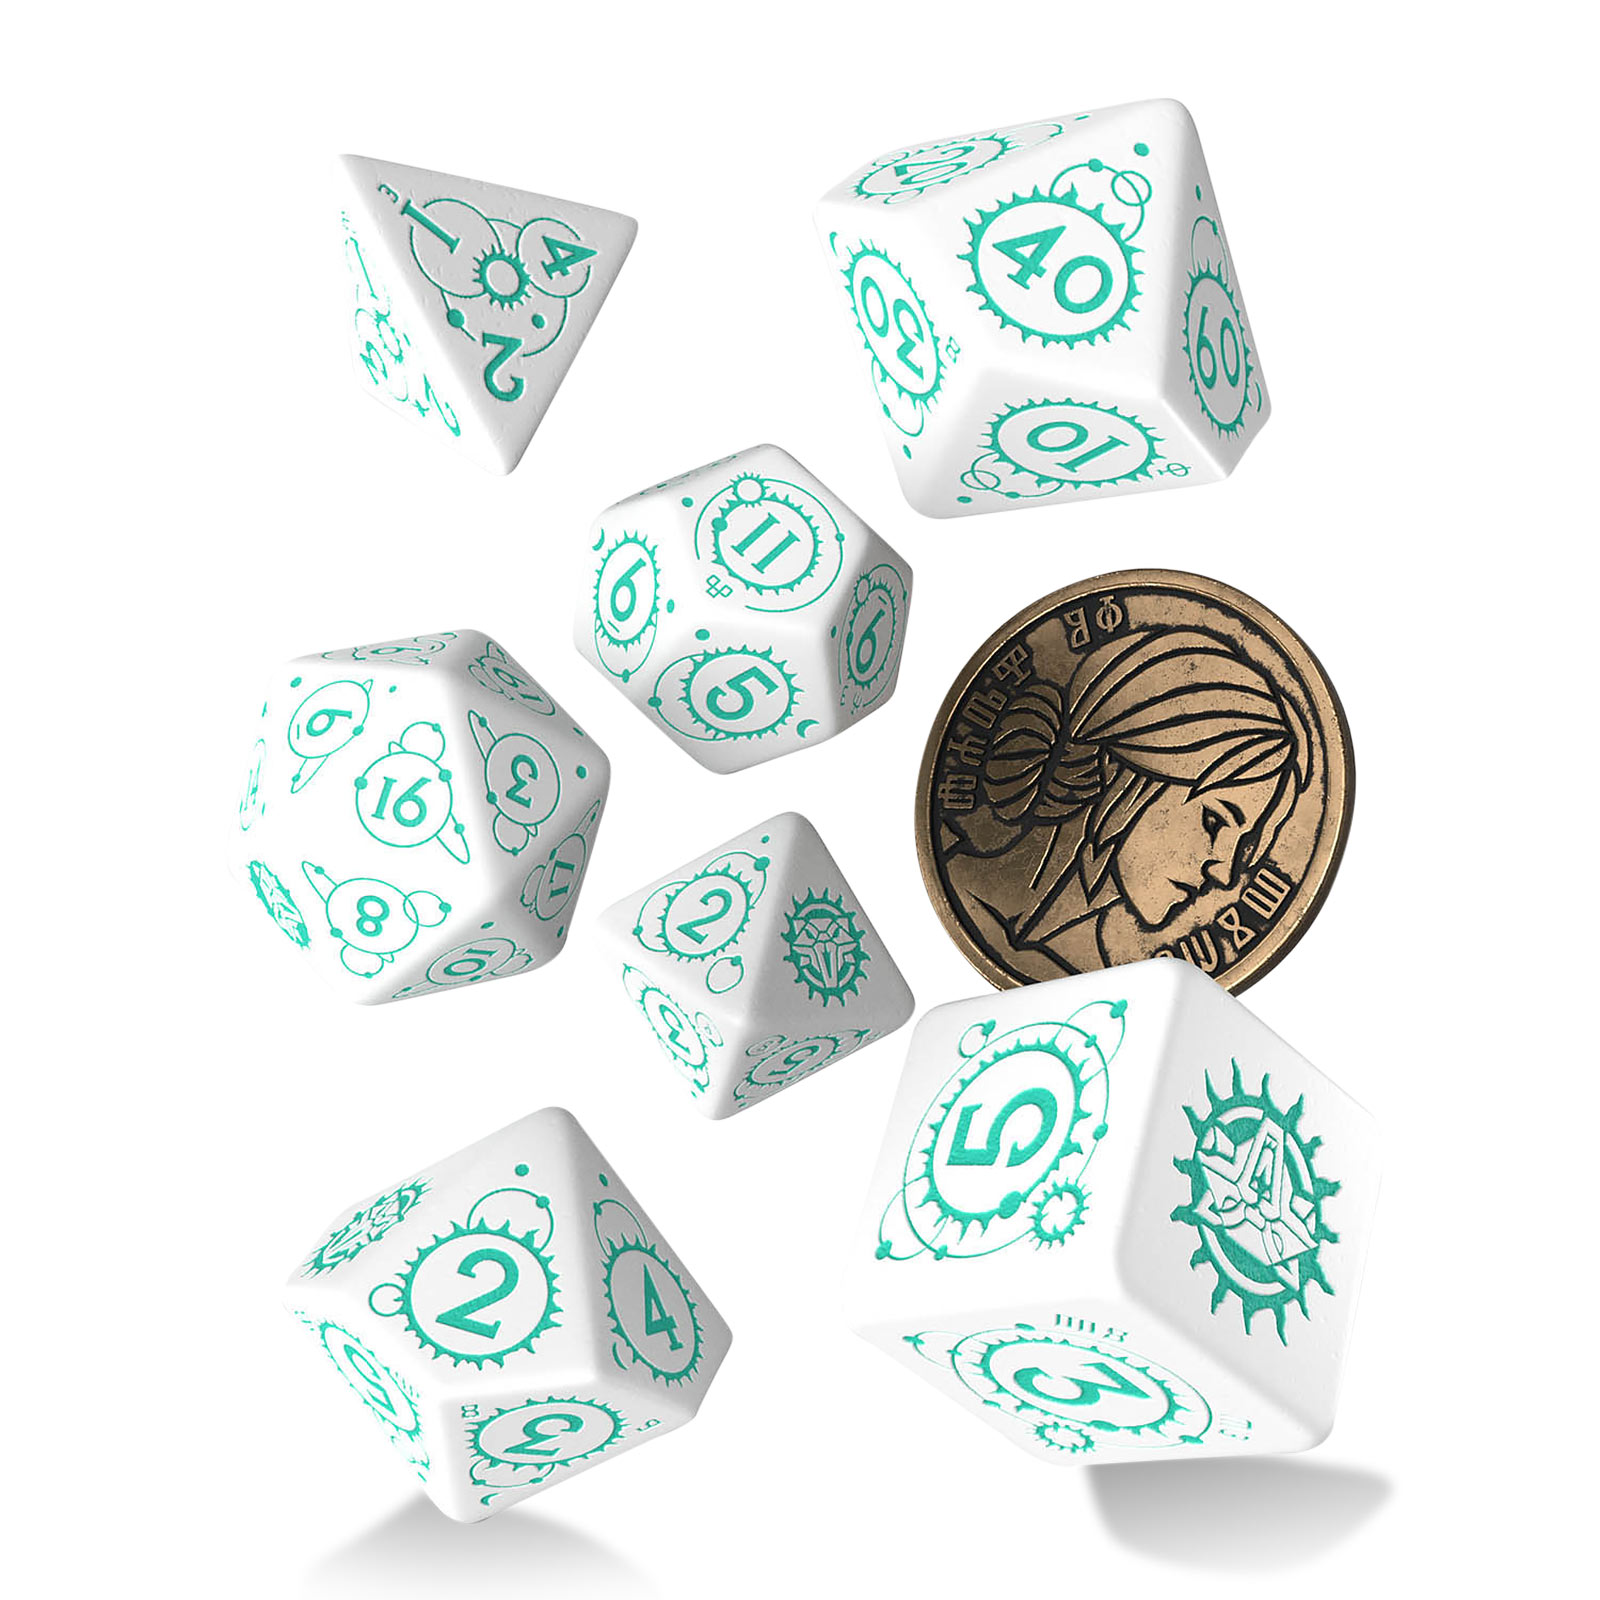 Witcher - Ciri RPG Dice Set 7pcs with Collector's Coin